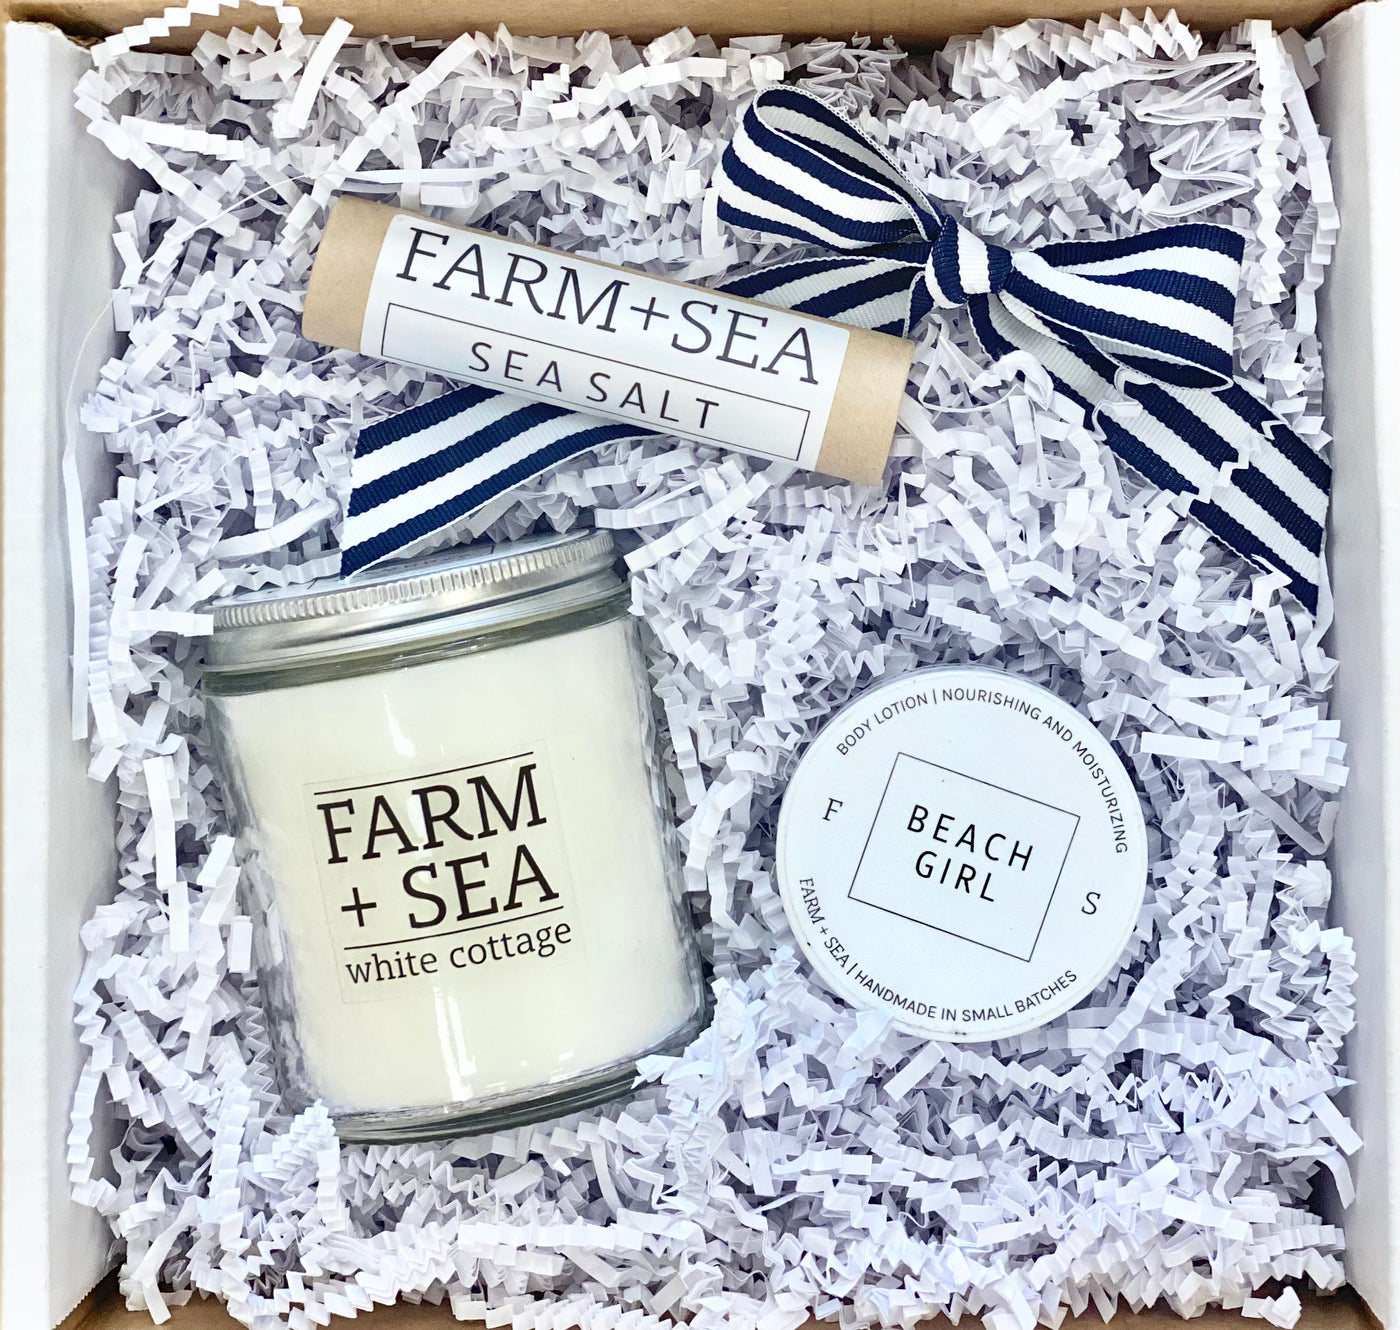 Farm + Sea at the Cottage Gift Box